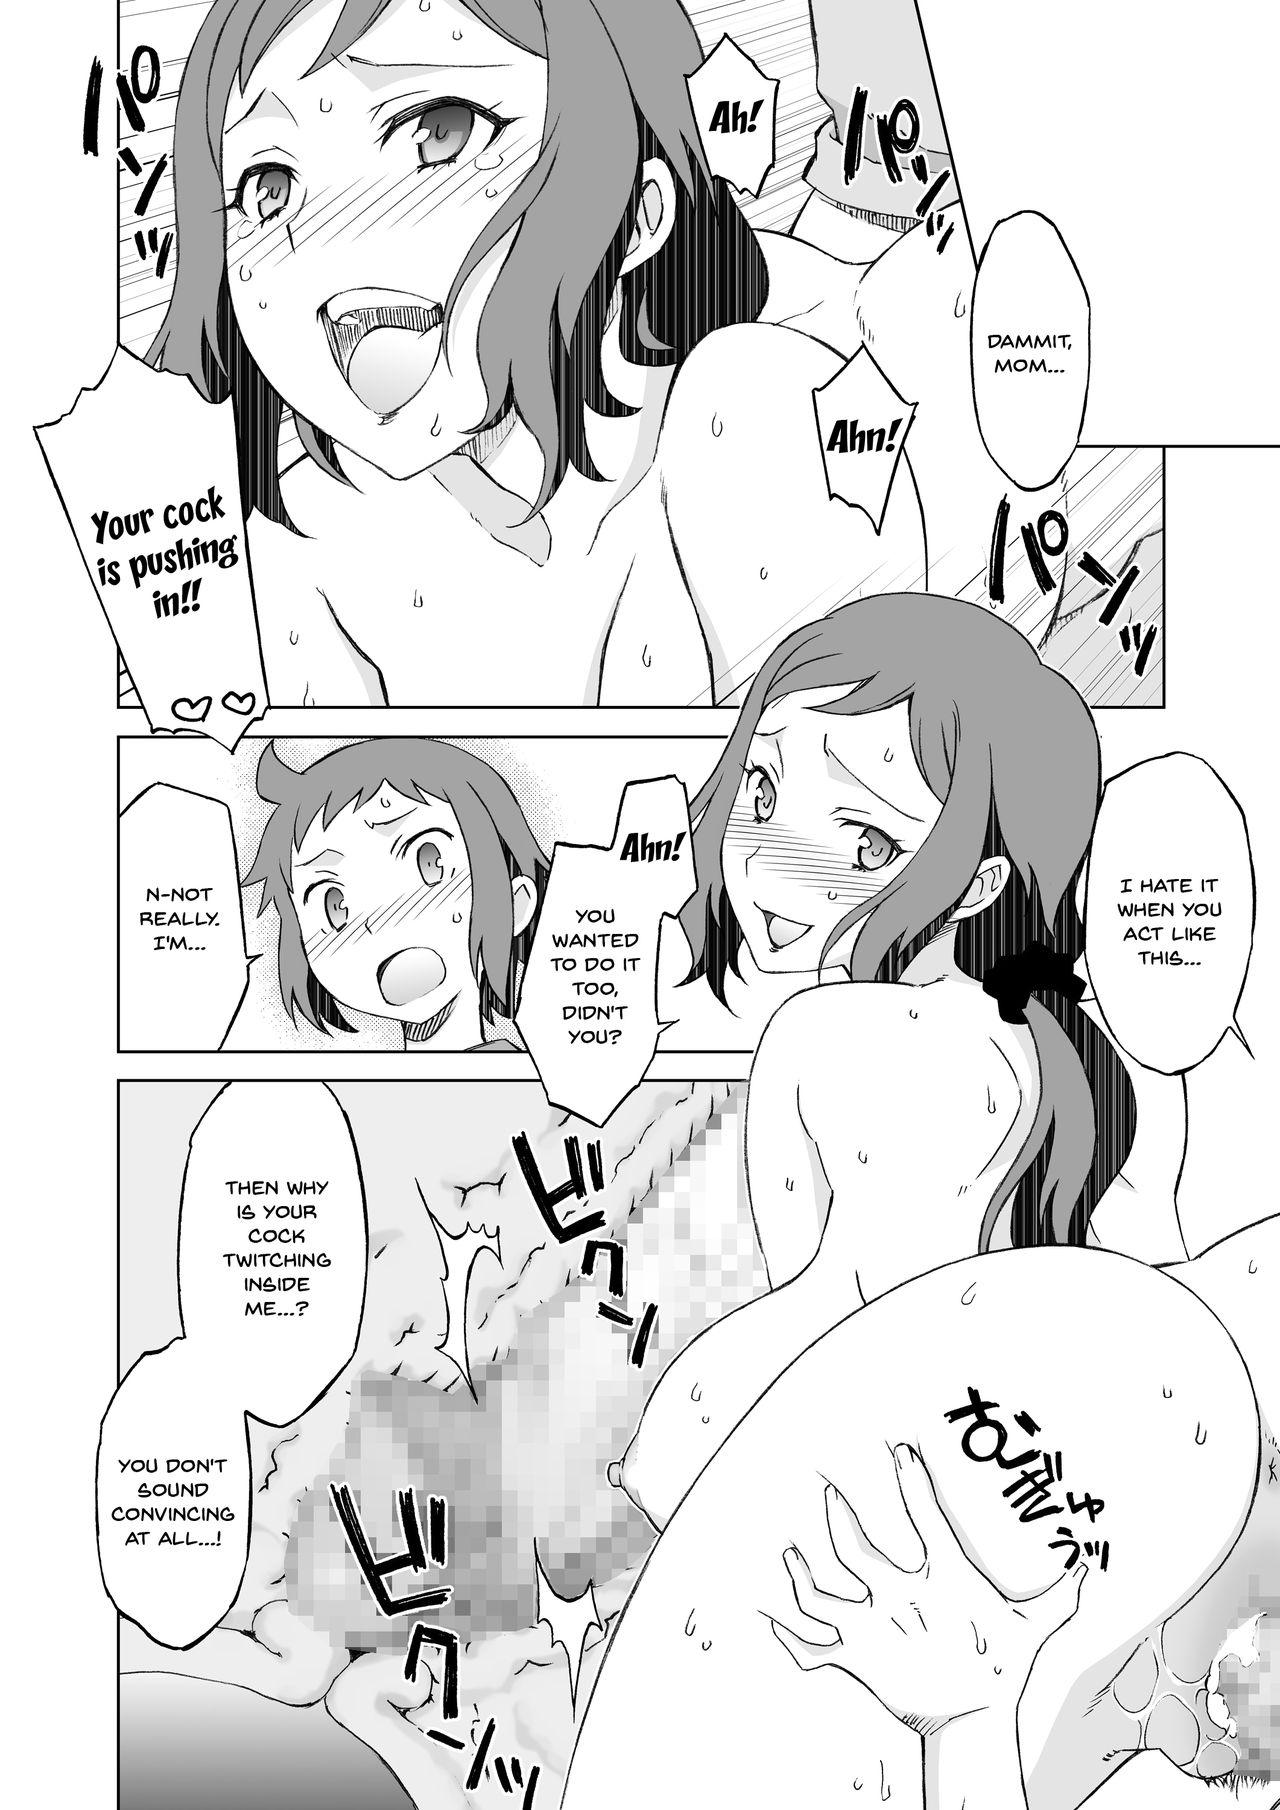 Porra Build Fuckers 2 - Gundam build fighters Cum On Pussy - Page 6